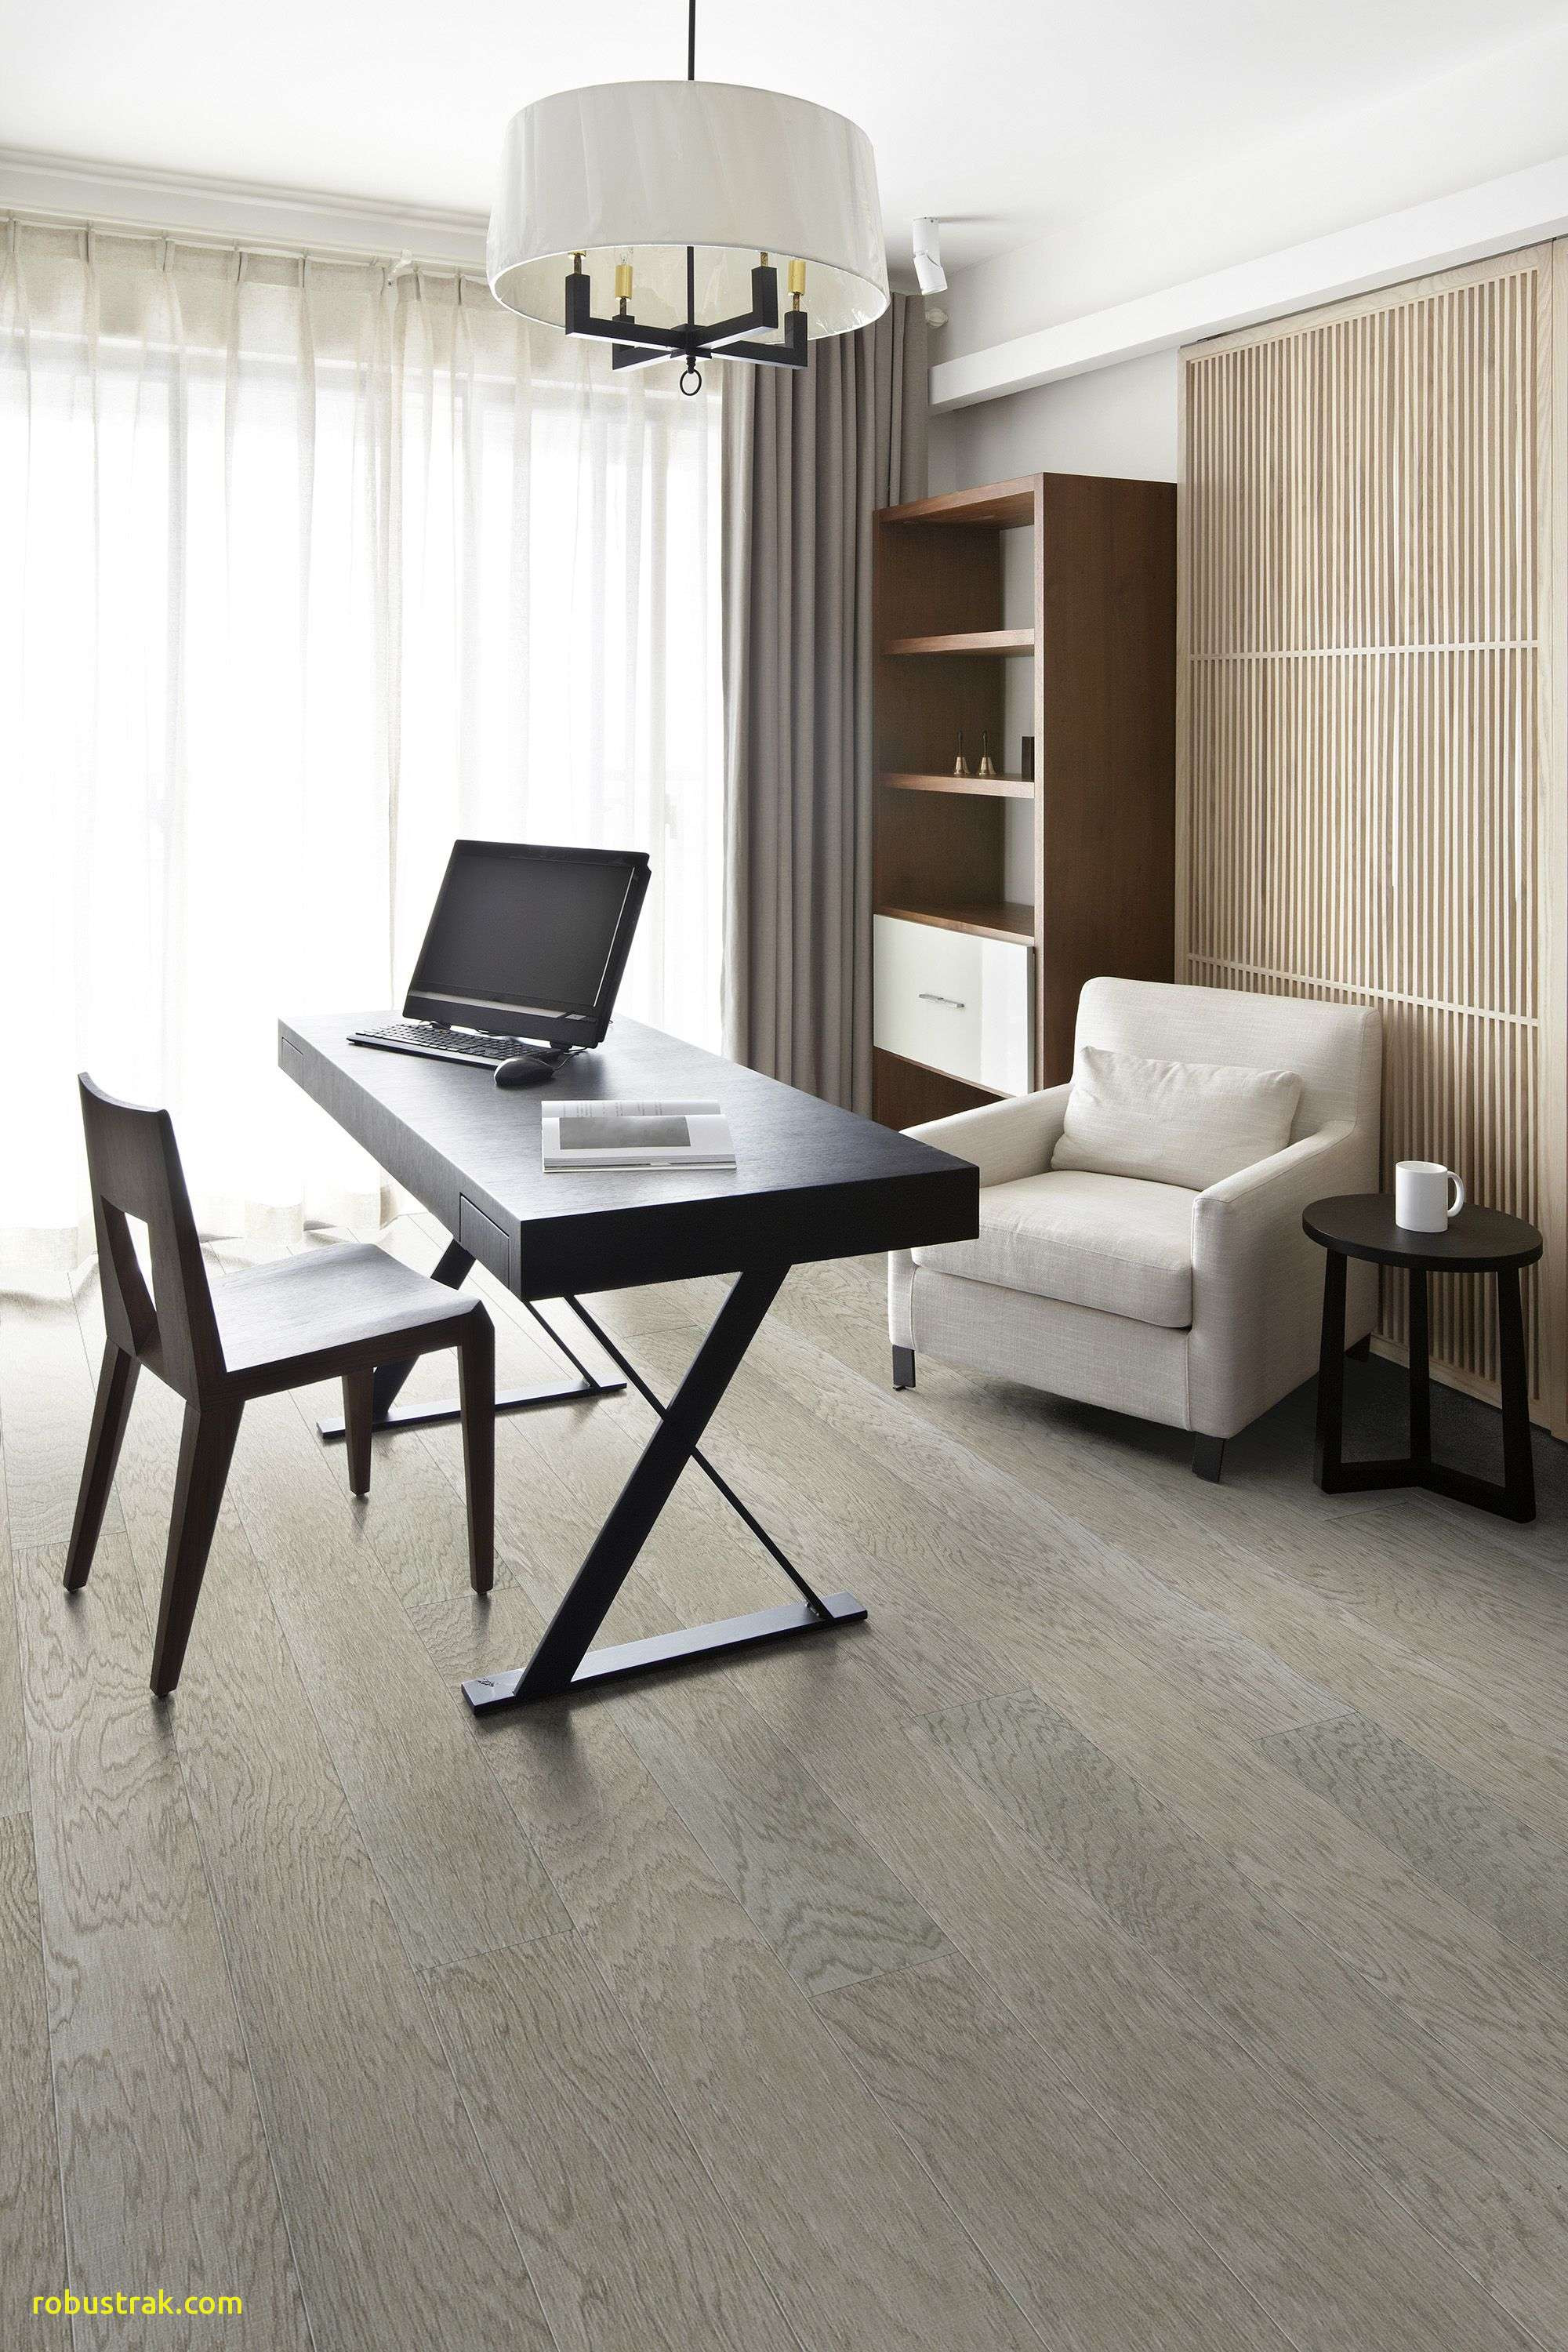 25 Unique Images Of Grey Hardwood Floors 2022 free download images of grey hardwood floors of awesome furniture for light wood floors home design ideas regarding soft grey hardwood flooring for a sophisticated office space